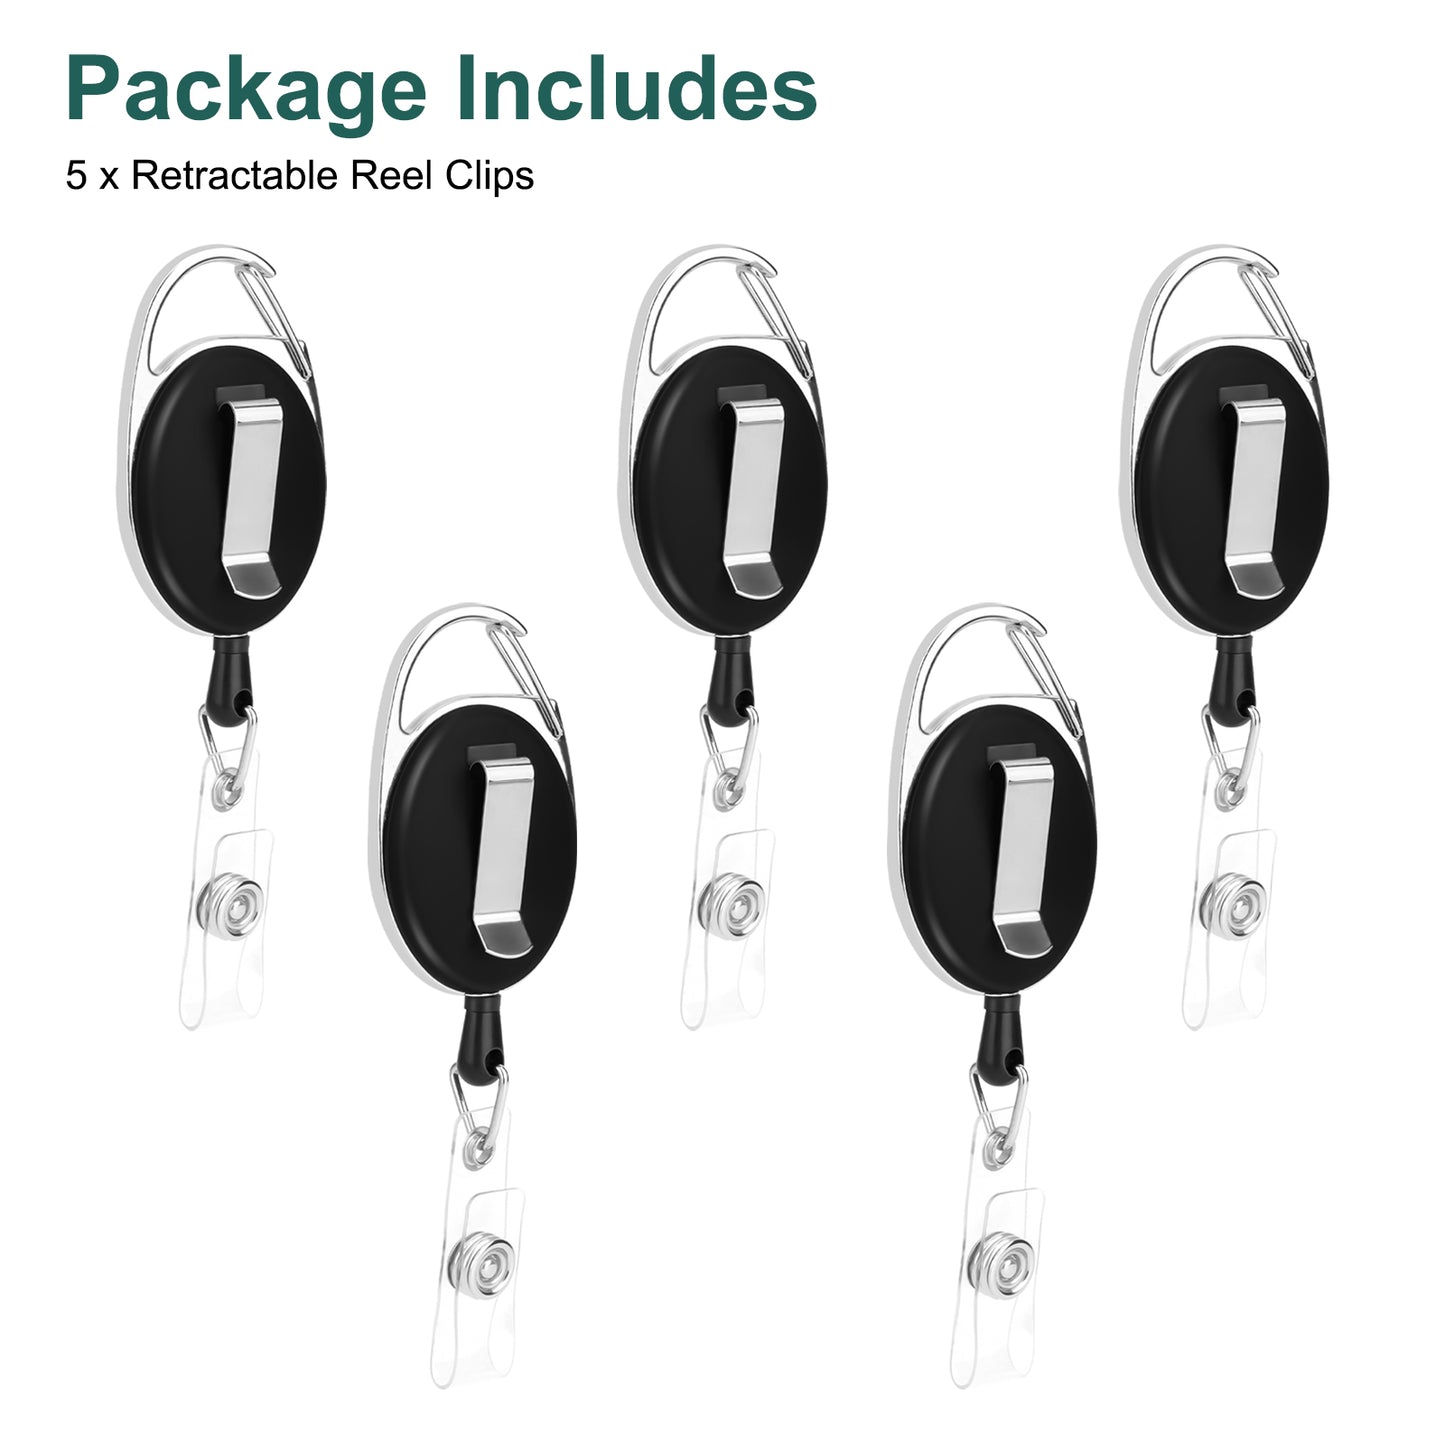 5Pcs Retractable ID Card Badge Holder - Heavy Duty Metal Keychain Reel Clip Key Ring with Waterproof Vertical Clear ID Card Holder (Black )